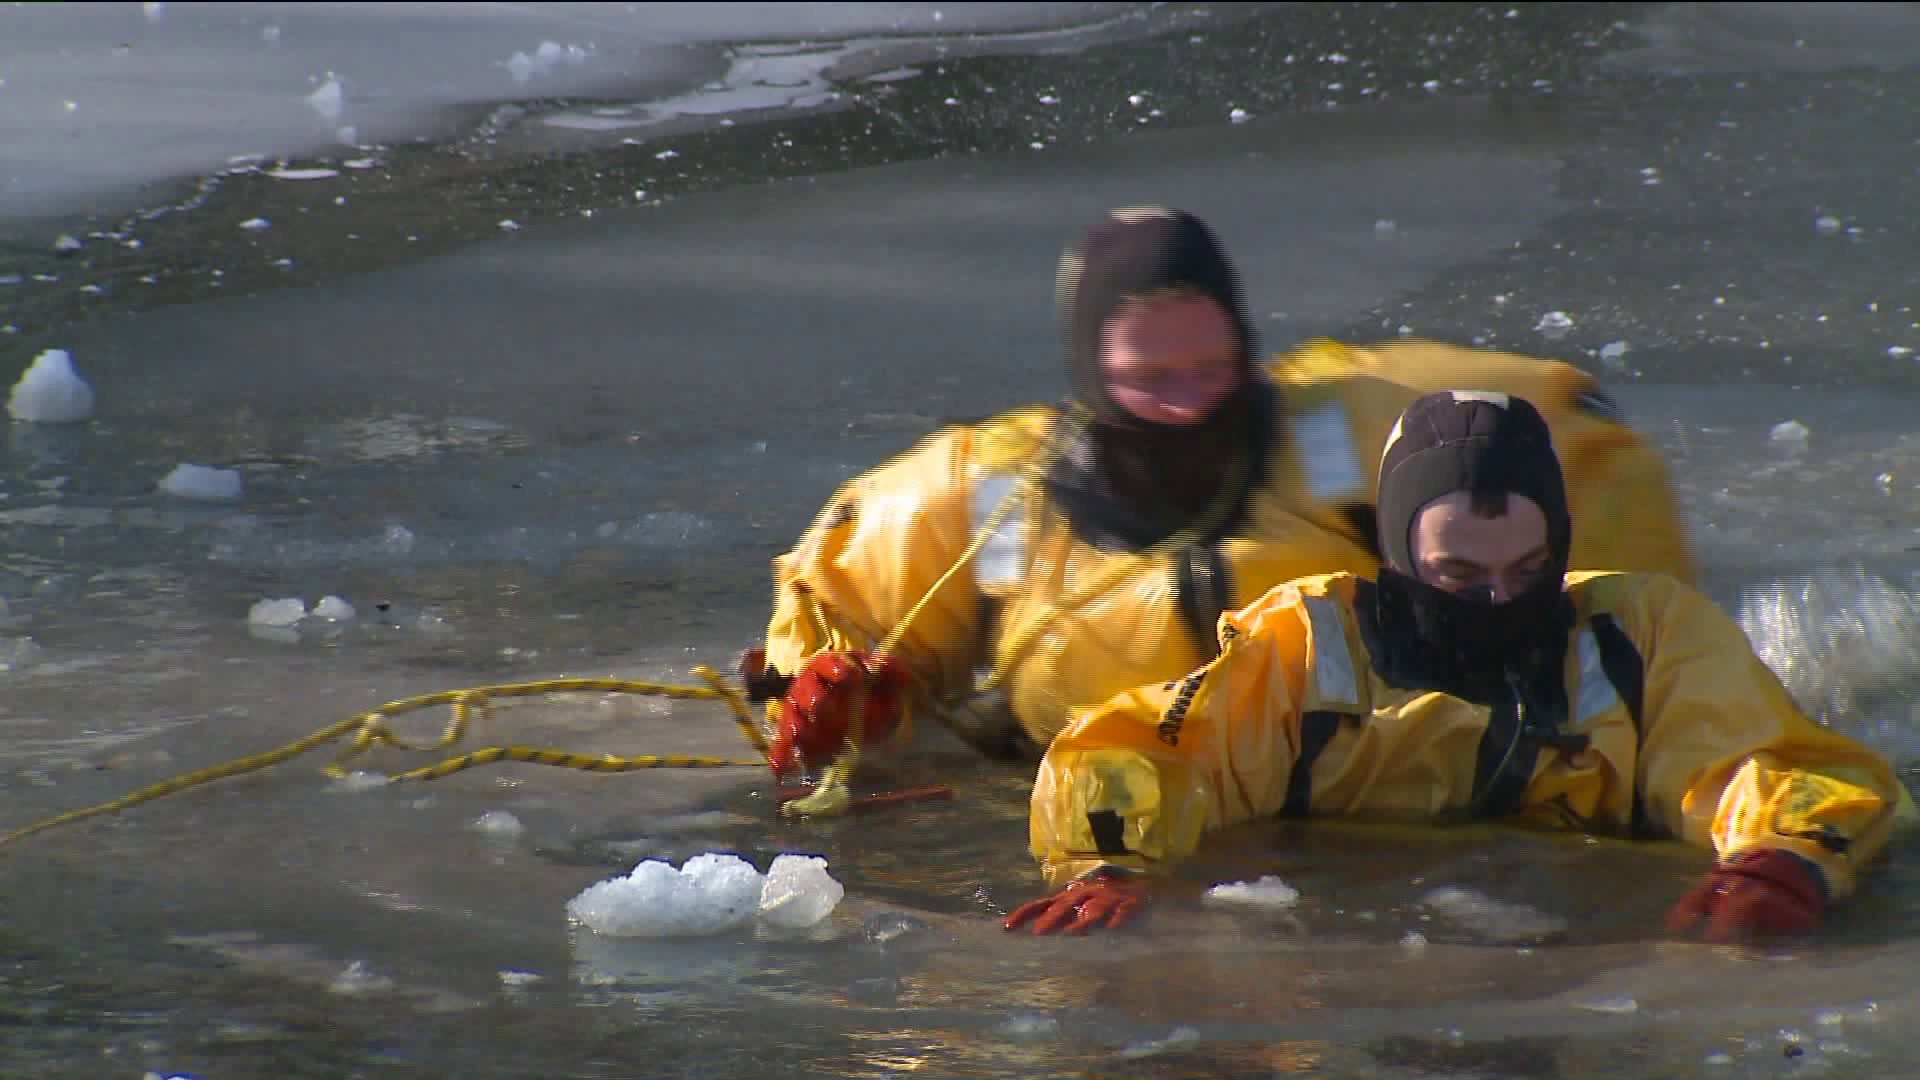 A deep freeze brings ice rescue training to the surface